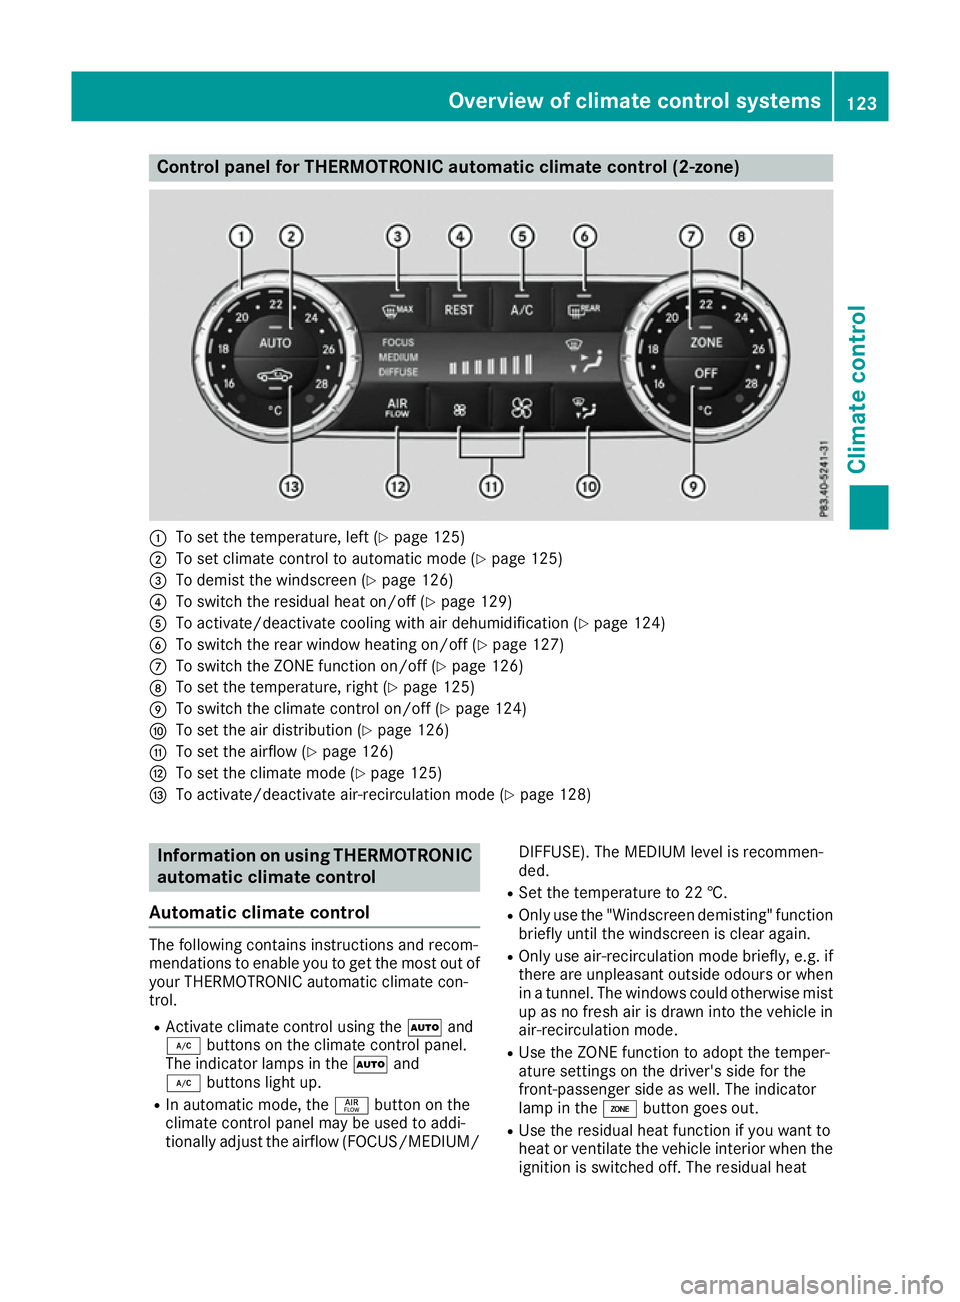 MERCEDES-BENZ SL ROADSTER 2016 User Guide Control panel for THERMOTRONIC automatic climate control (2-zone)
:
To set the temperature, left (Y page 125)
; To set climate control to automatic mode (Y page 125)
= To demist the windscreen (Y page